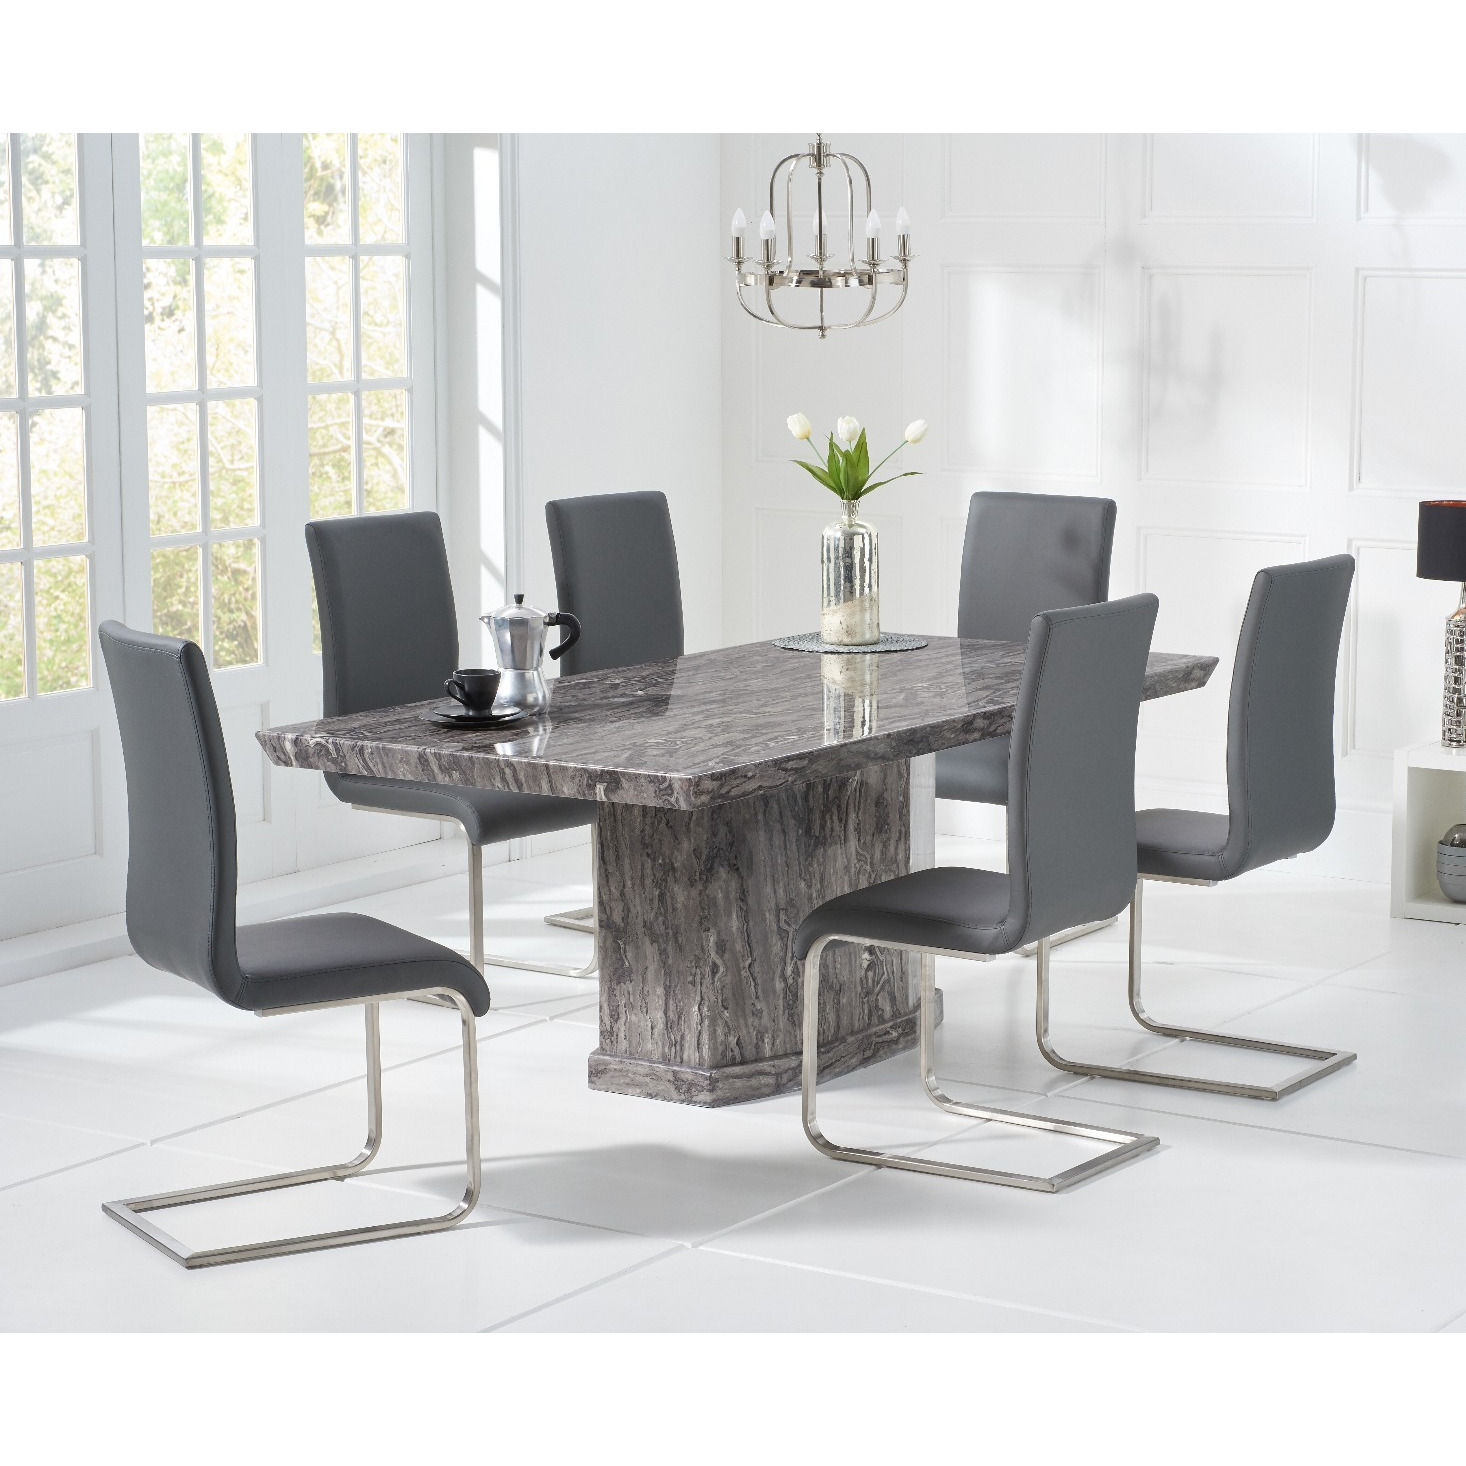 Carvelle 160cm Dark Grey Pedestal Marble Dining Table With 4 Black Austin Chairs